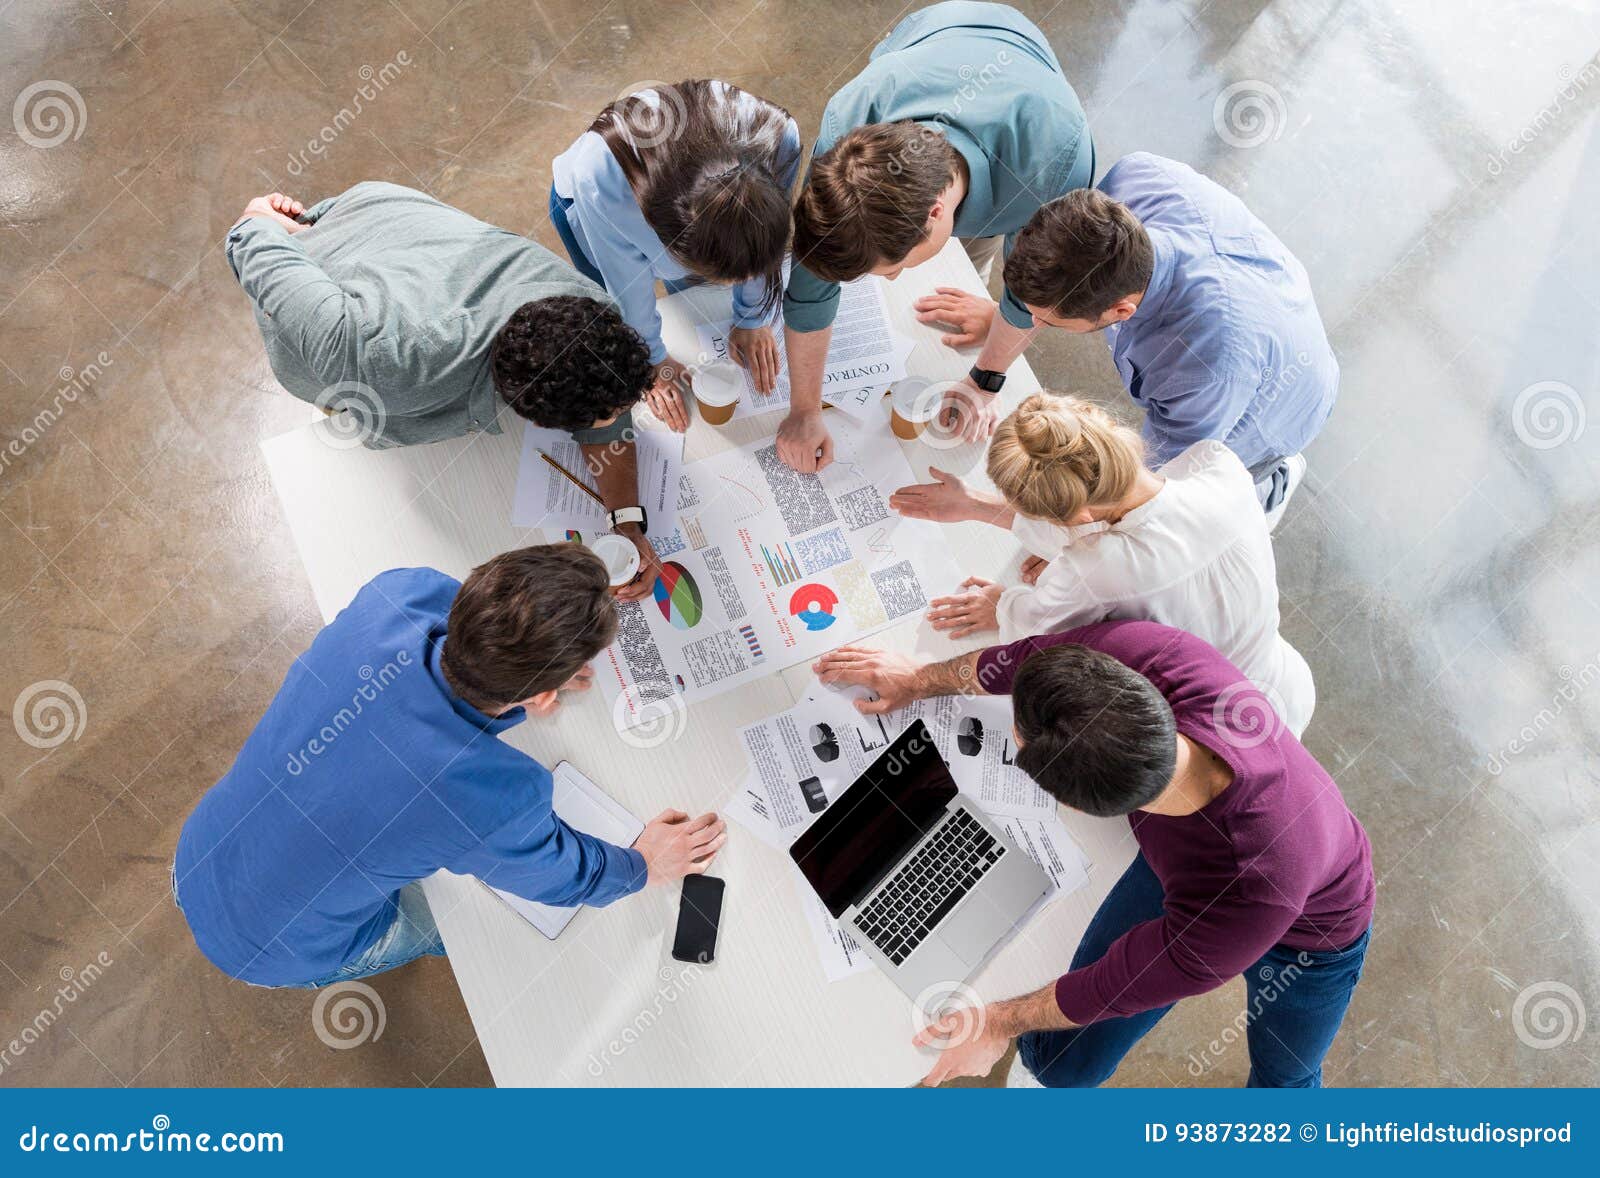 overhead view of professional businesspeople discussing and brainstorming together